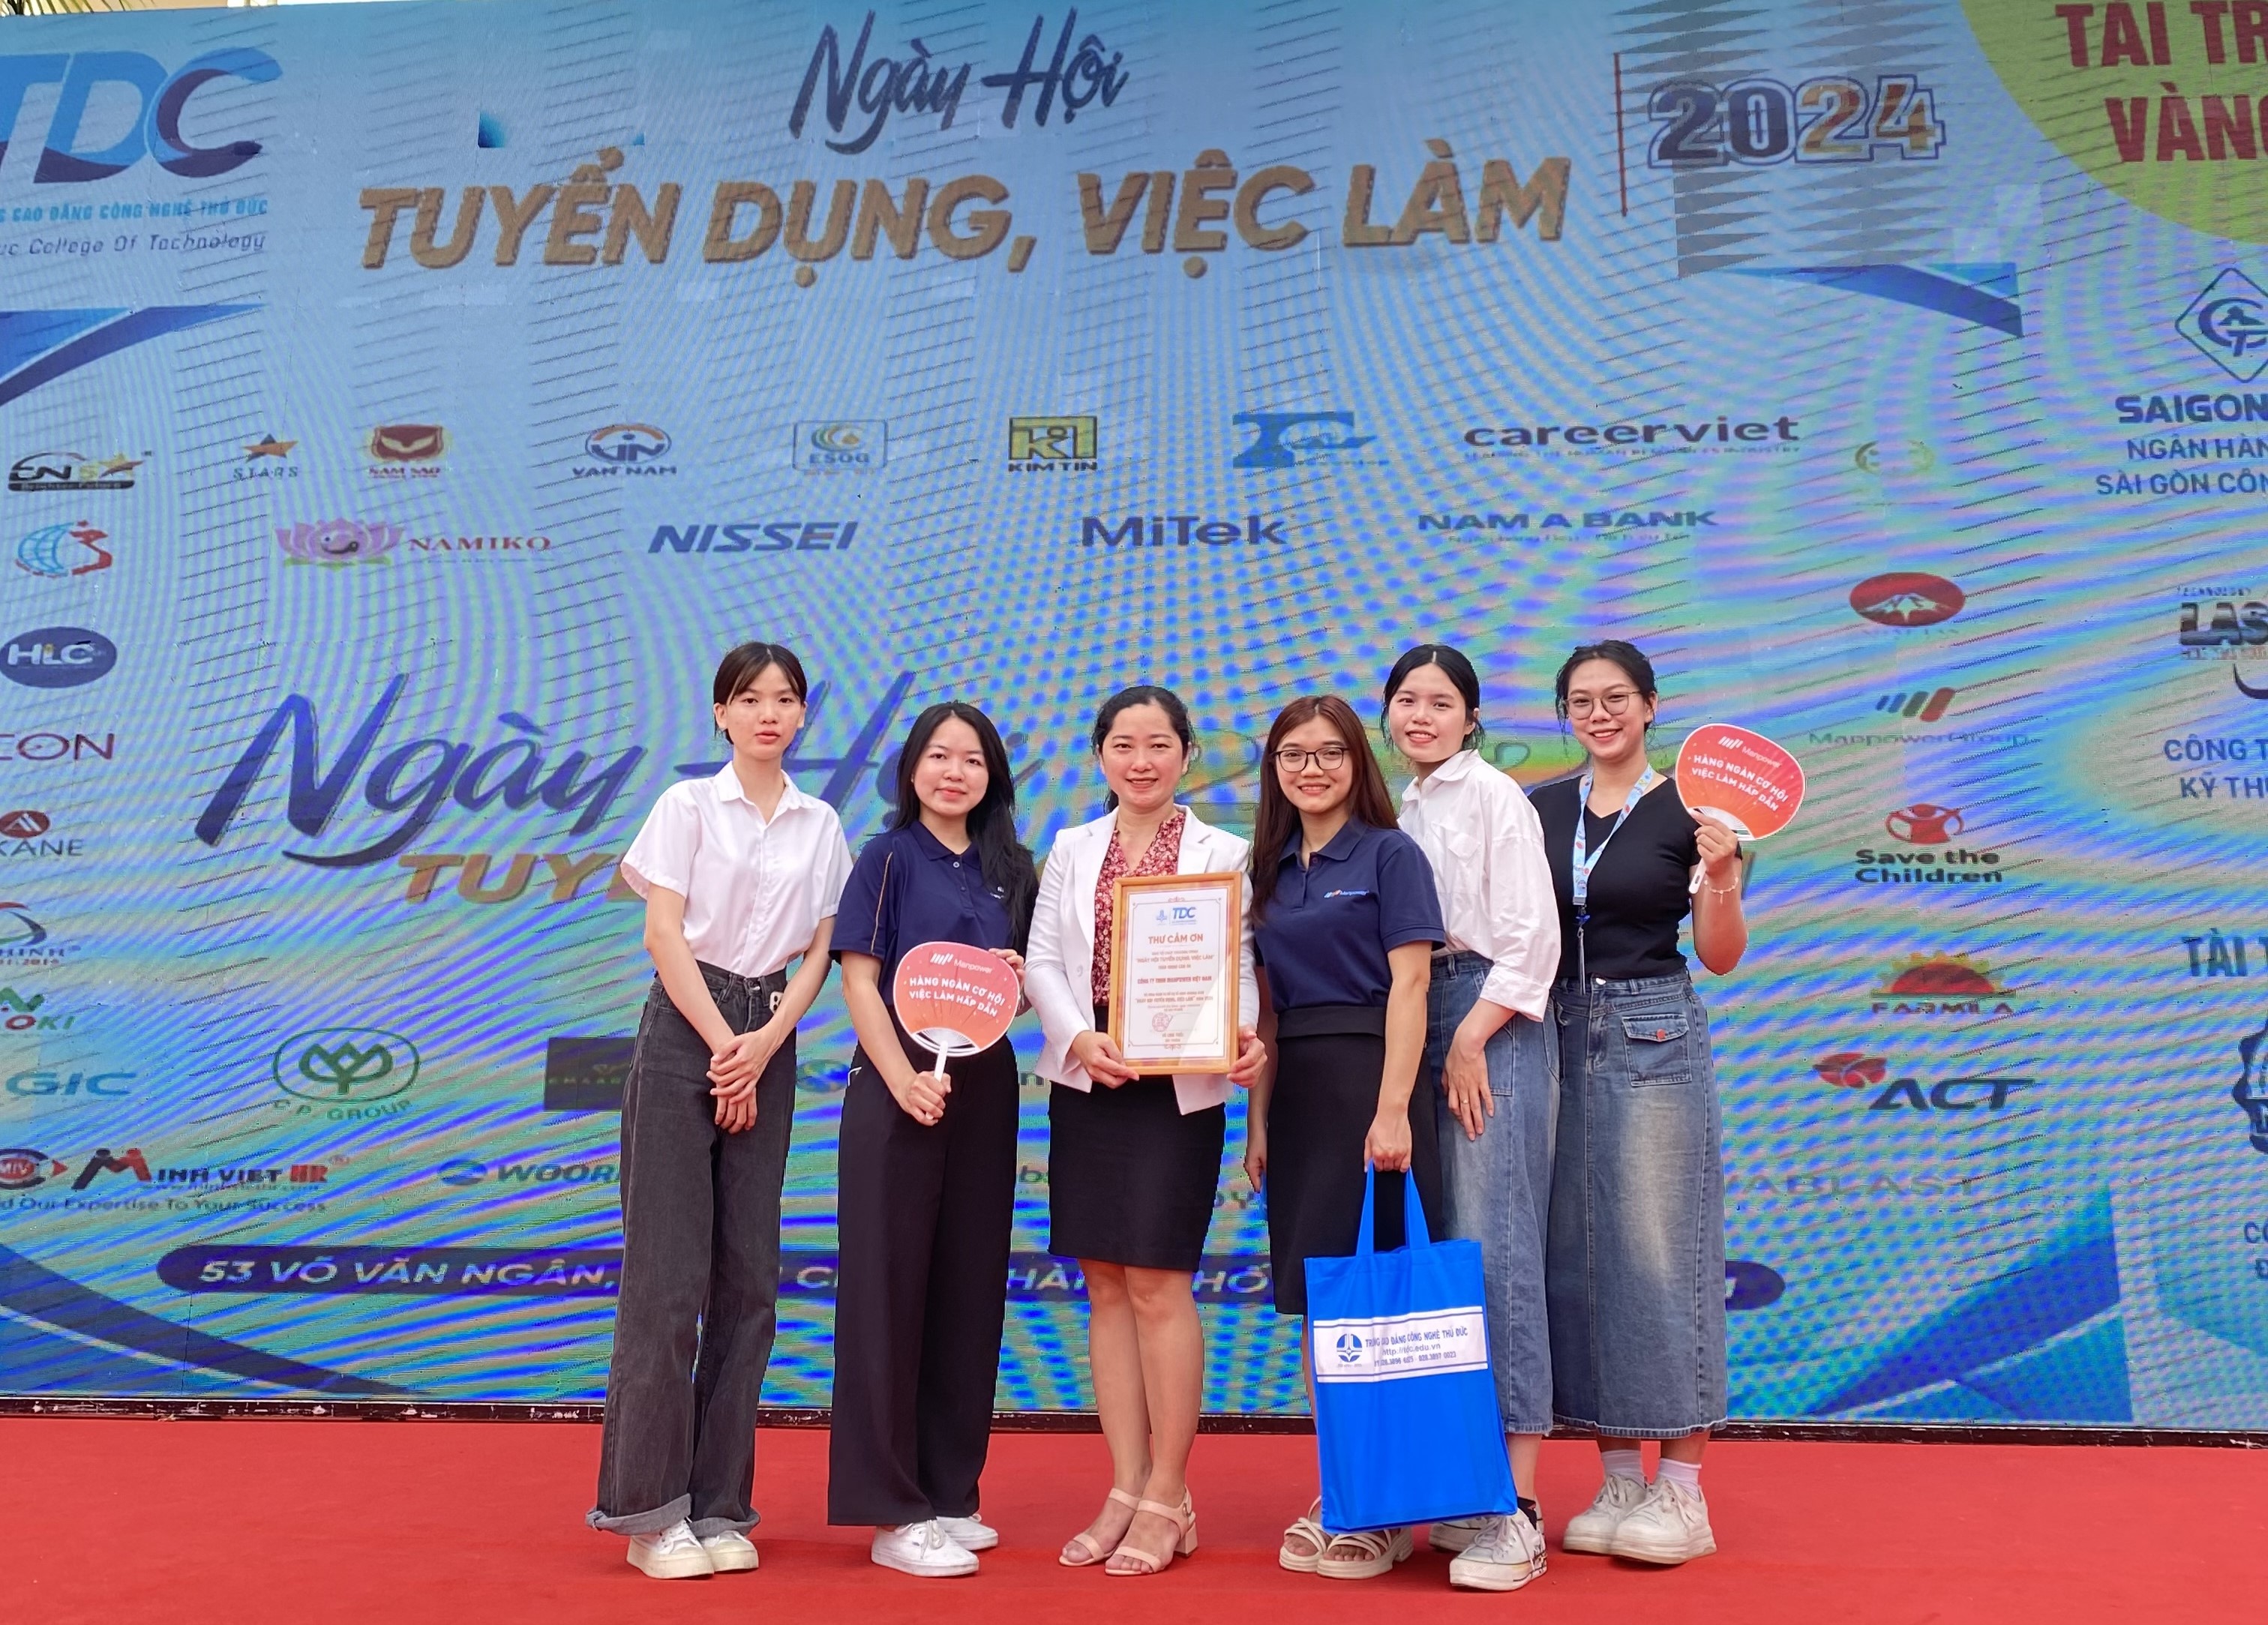 Manpower Việt Nam joined Thu Duc College of Technology’s Career Fair 2024